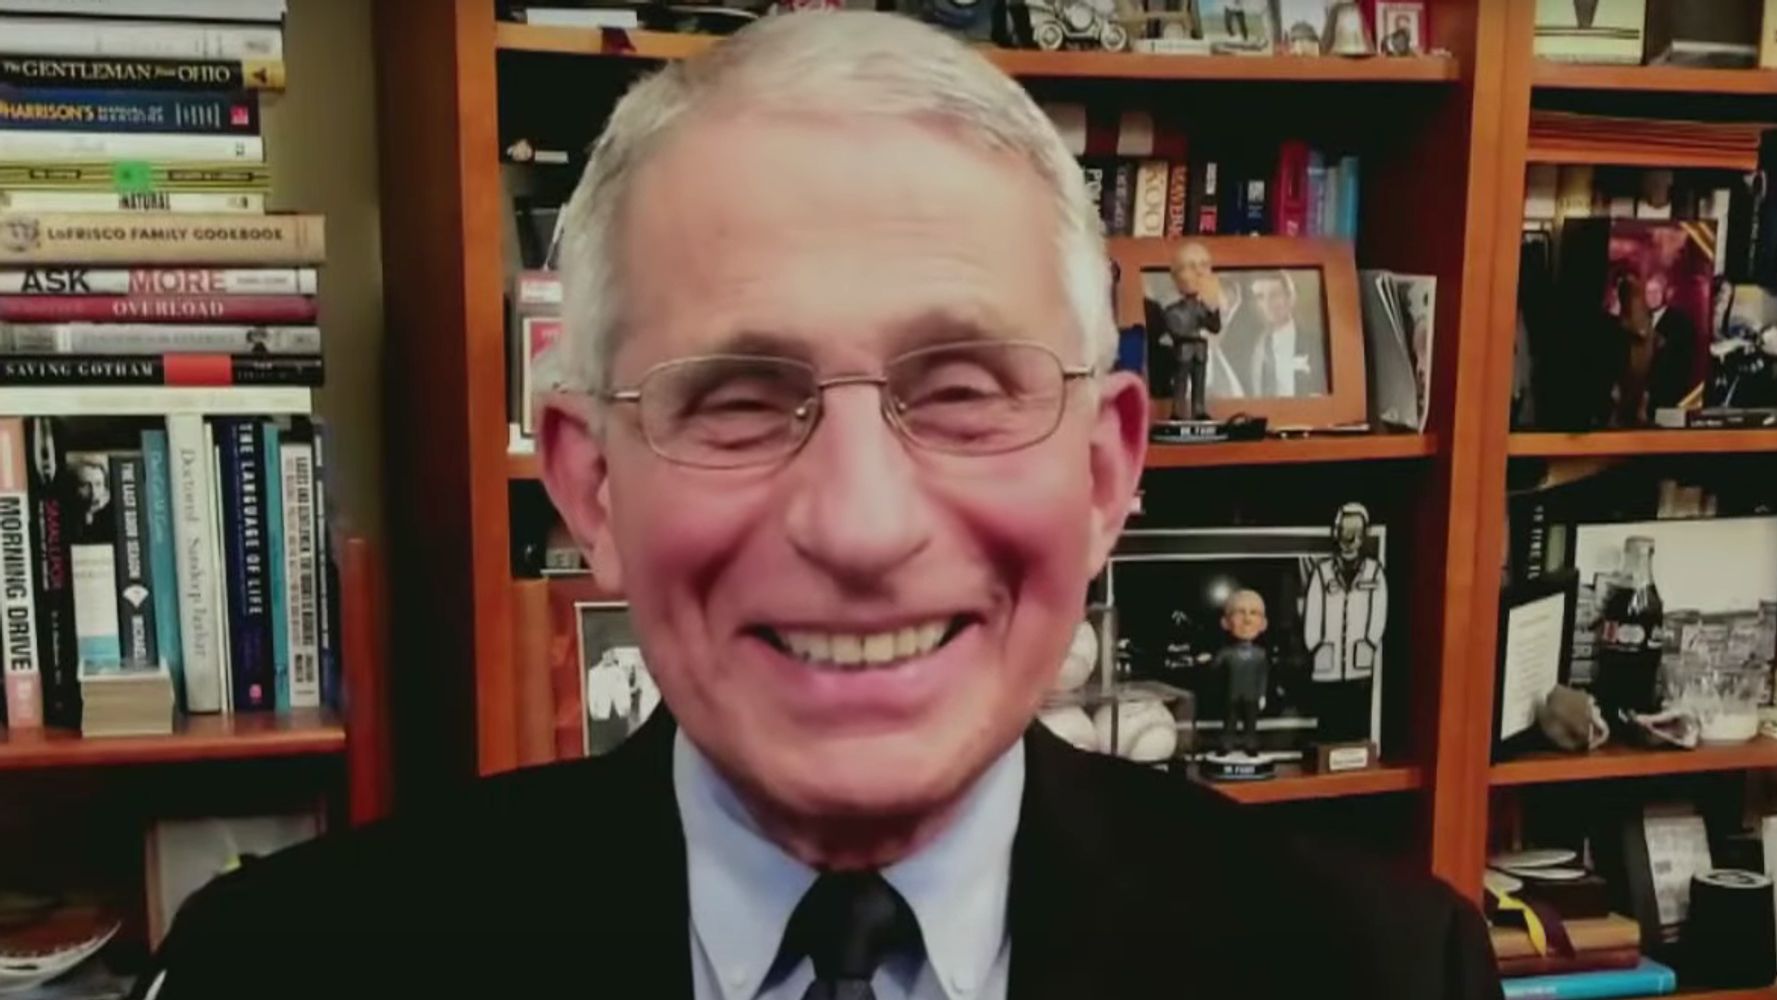 Fauci has a 1-word answer to the question about “What has changed” around January 20th